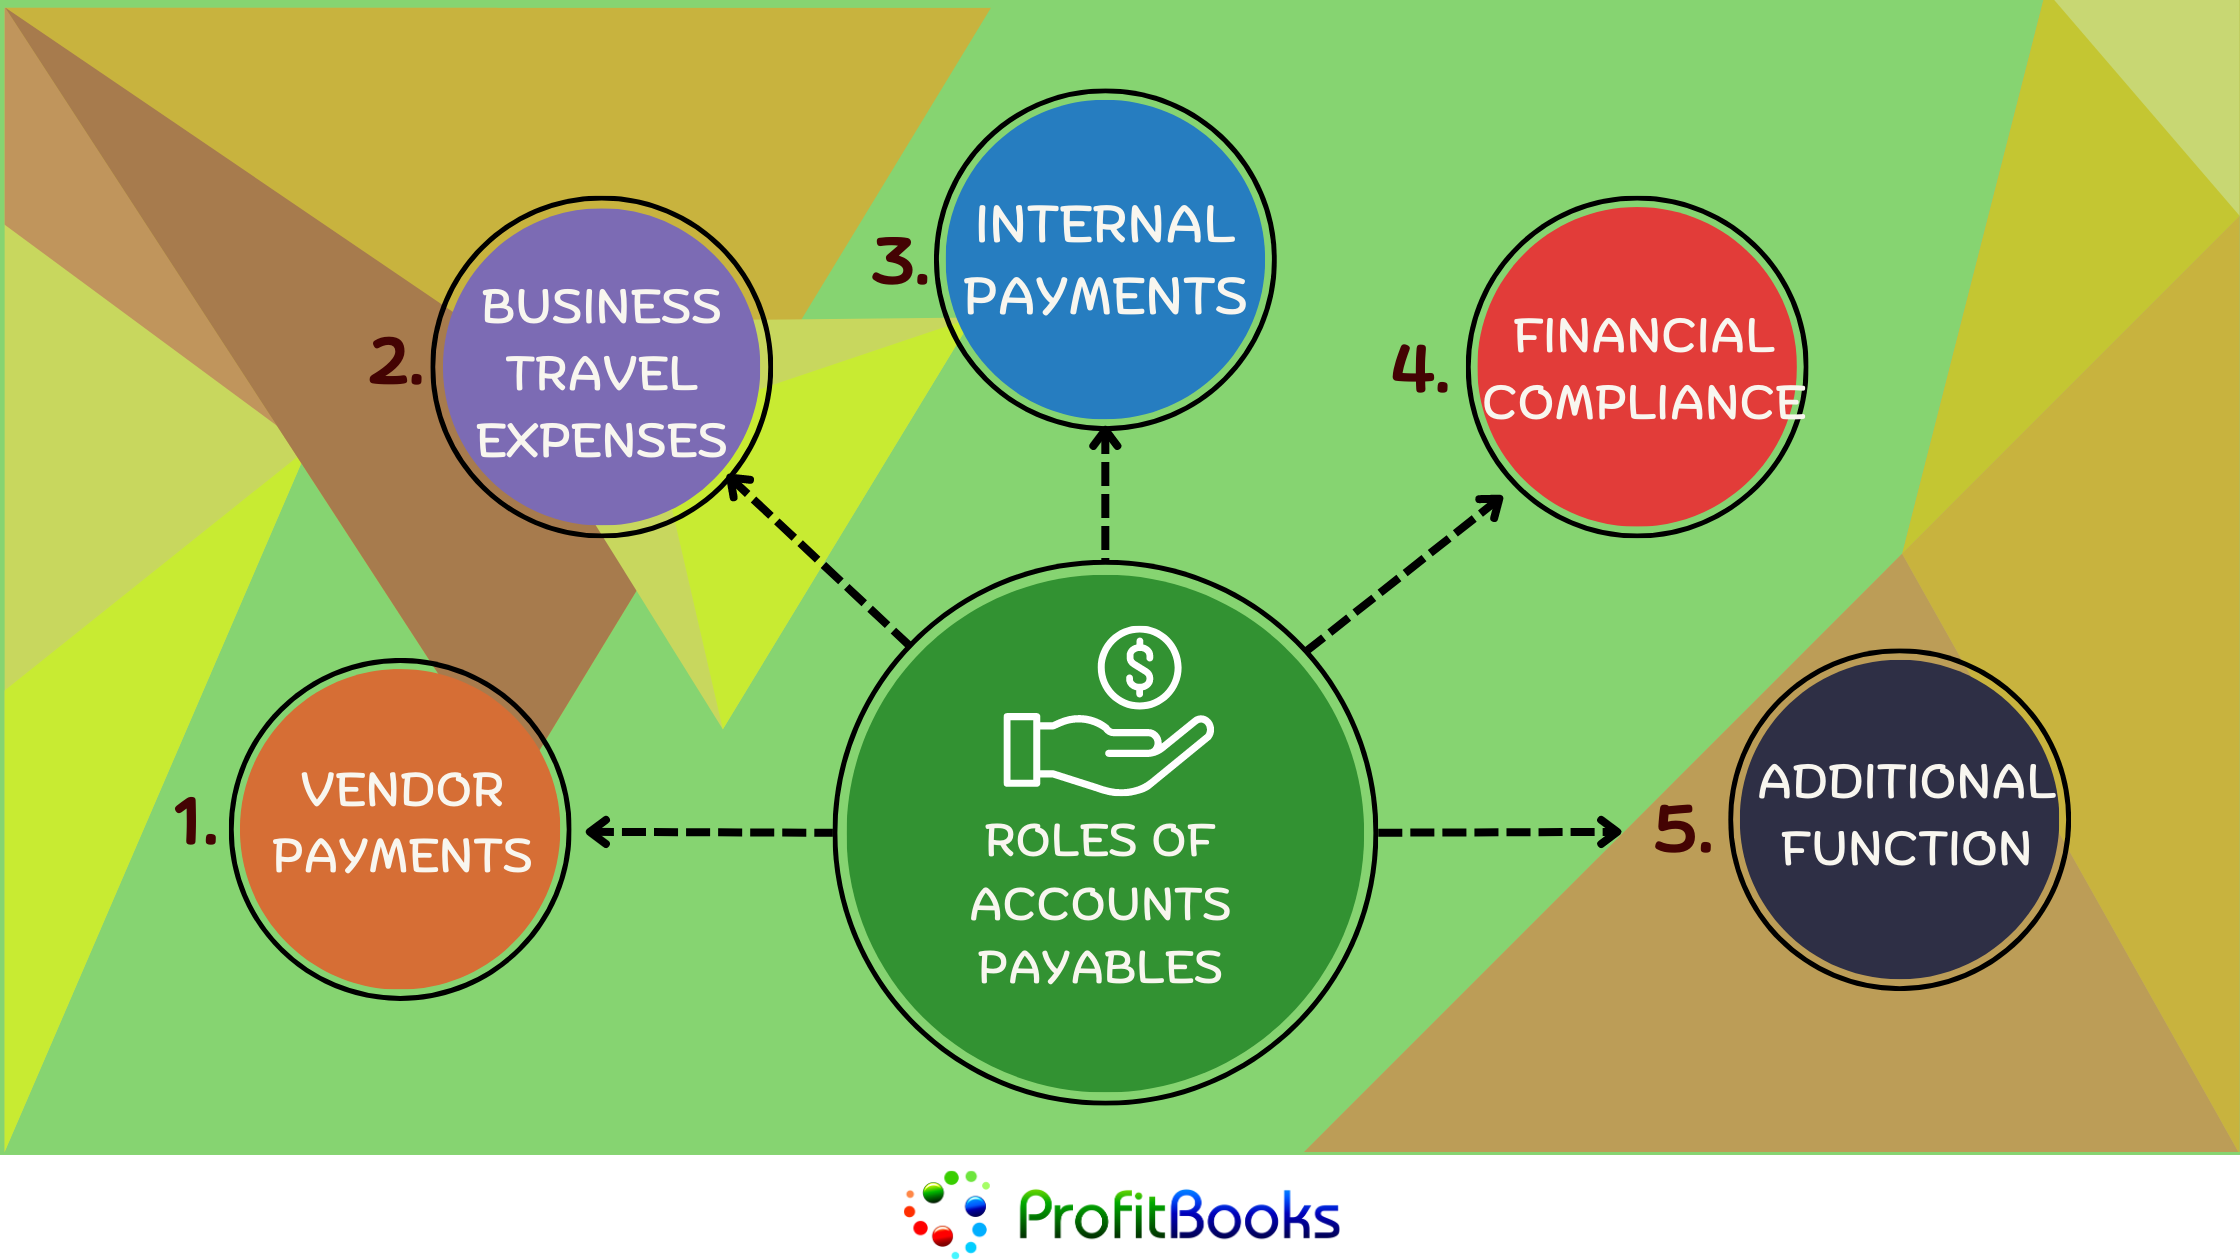 Roles of accounts payable